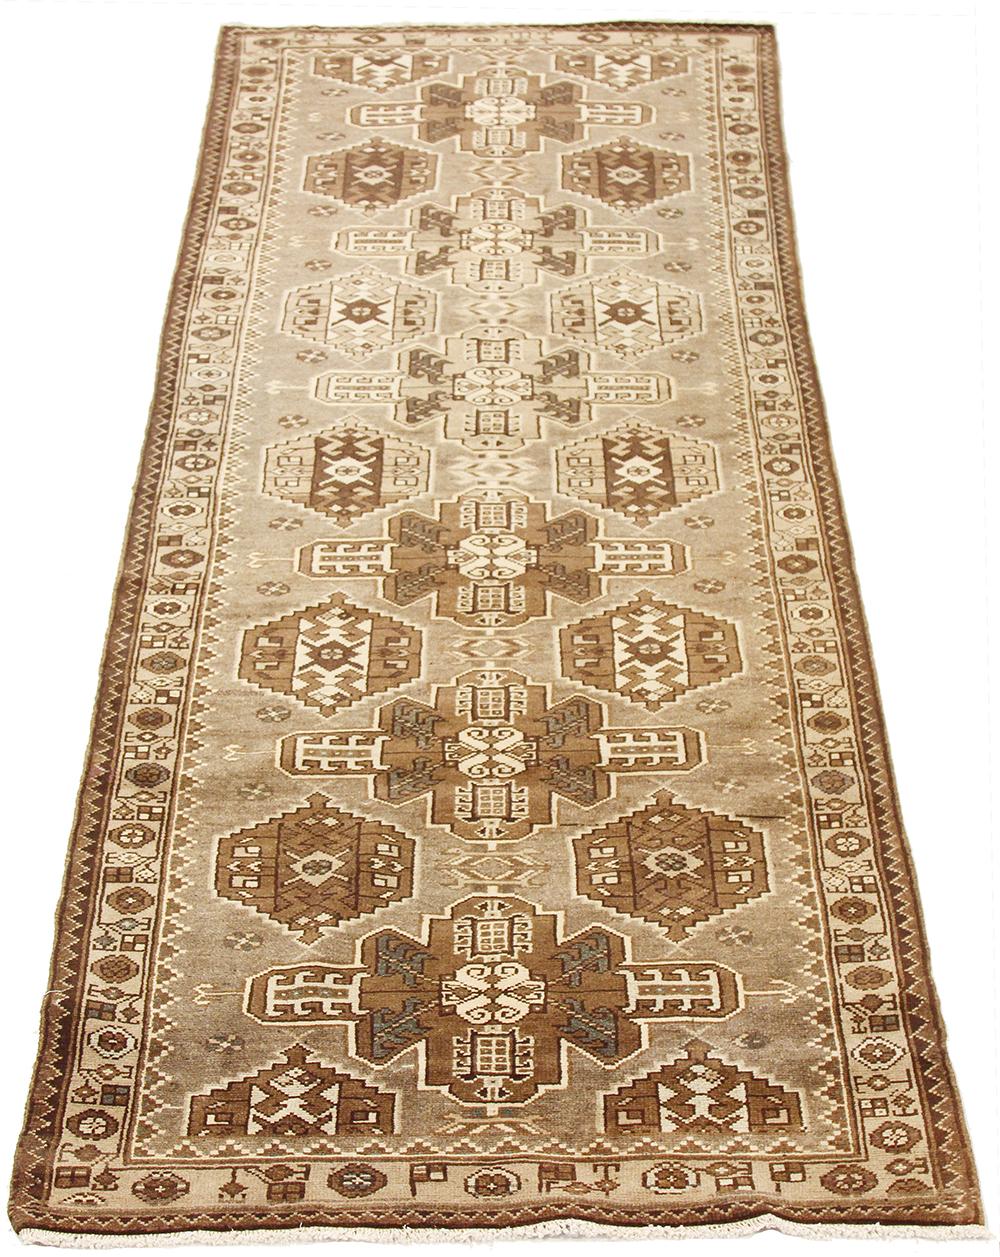 Antique Persian runner rug handwoven from the finest sheep’s wool and colored with all-natural vegetable dyes that are safe for humans and pets. It’s a traditional Malayer design featuring ivory and brown tribal details on a beige field. It’s a